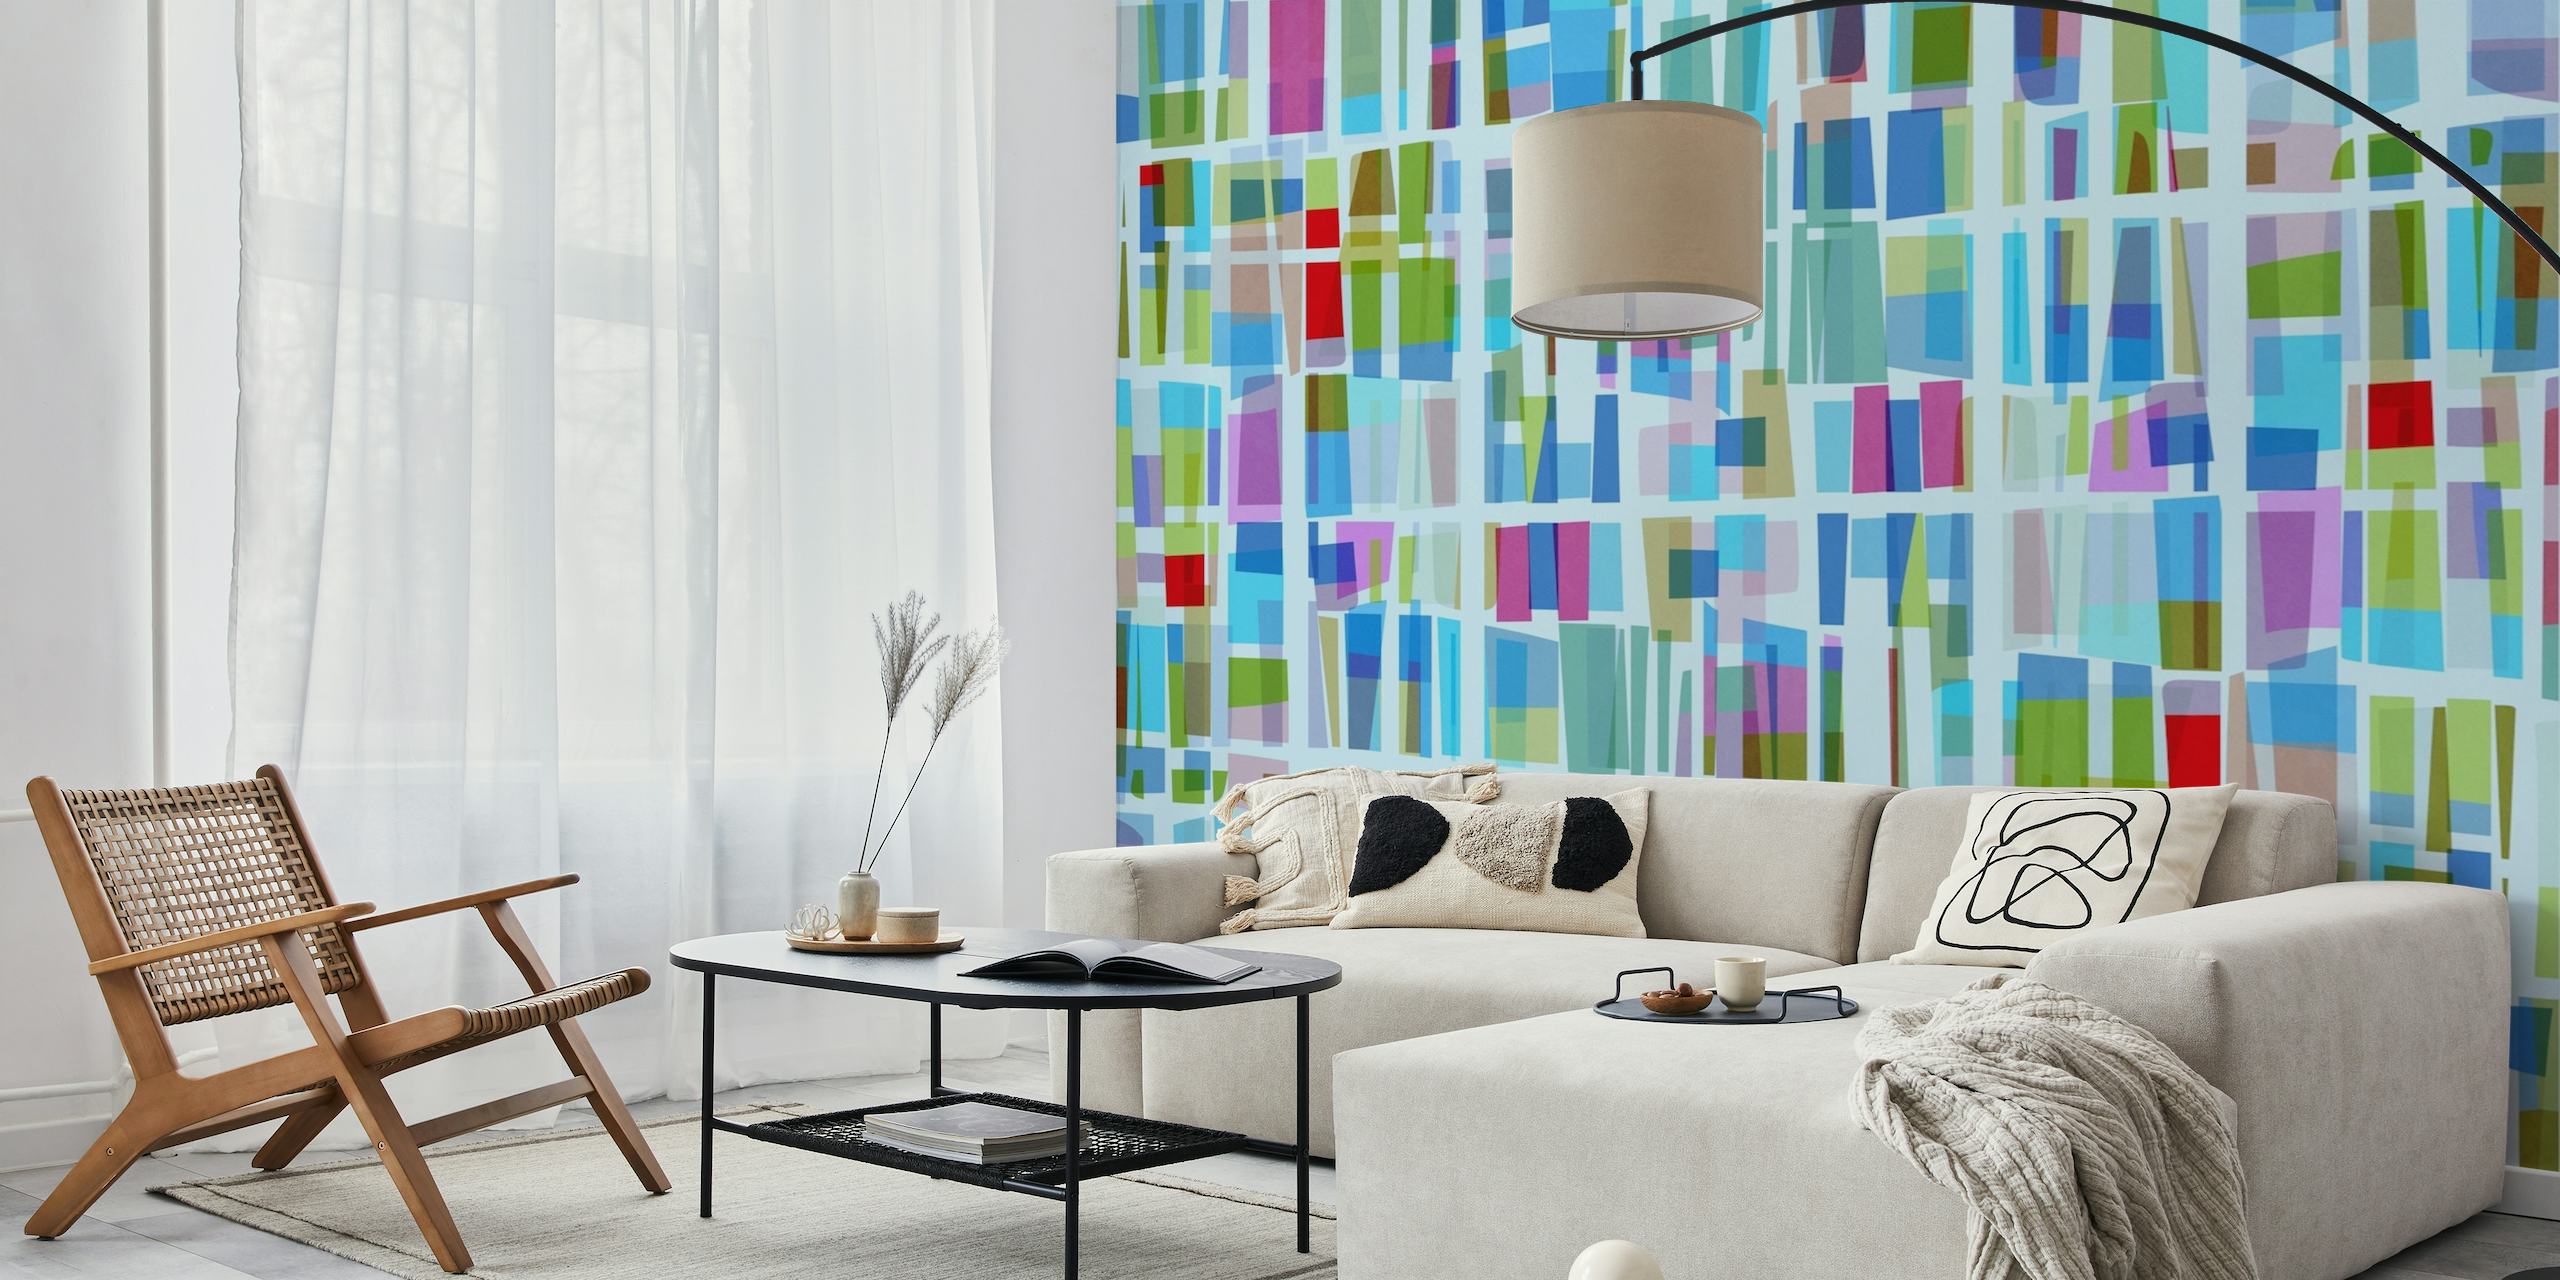 Abstract 'Bluish Square' wall mural with a geometric pattern of blues, greens, and accents of pink and purple